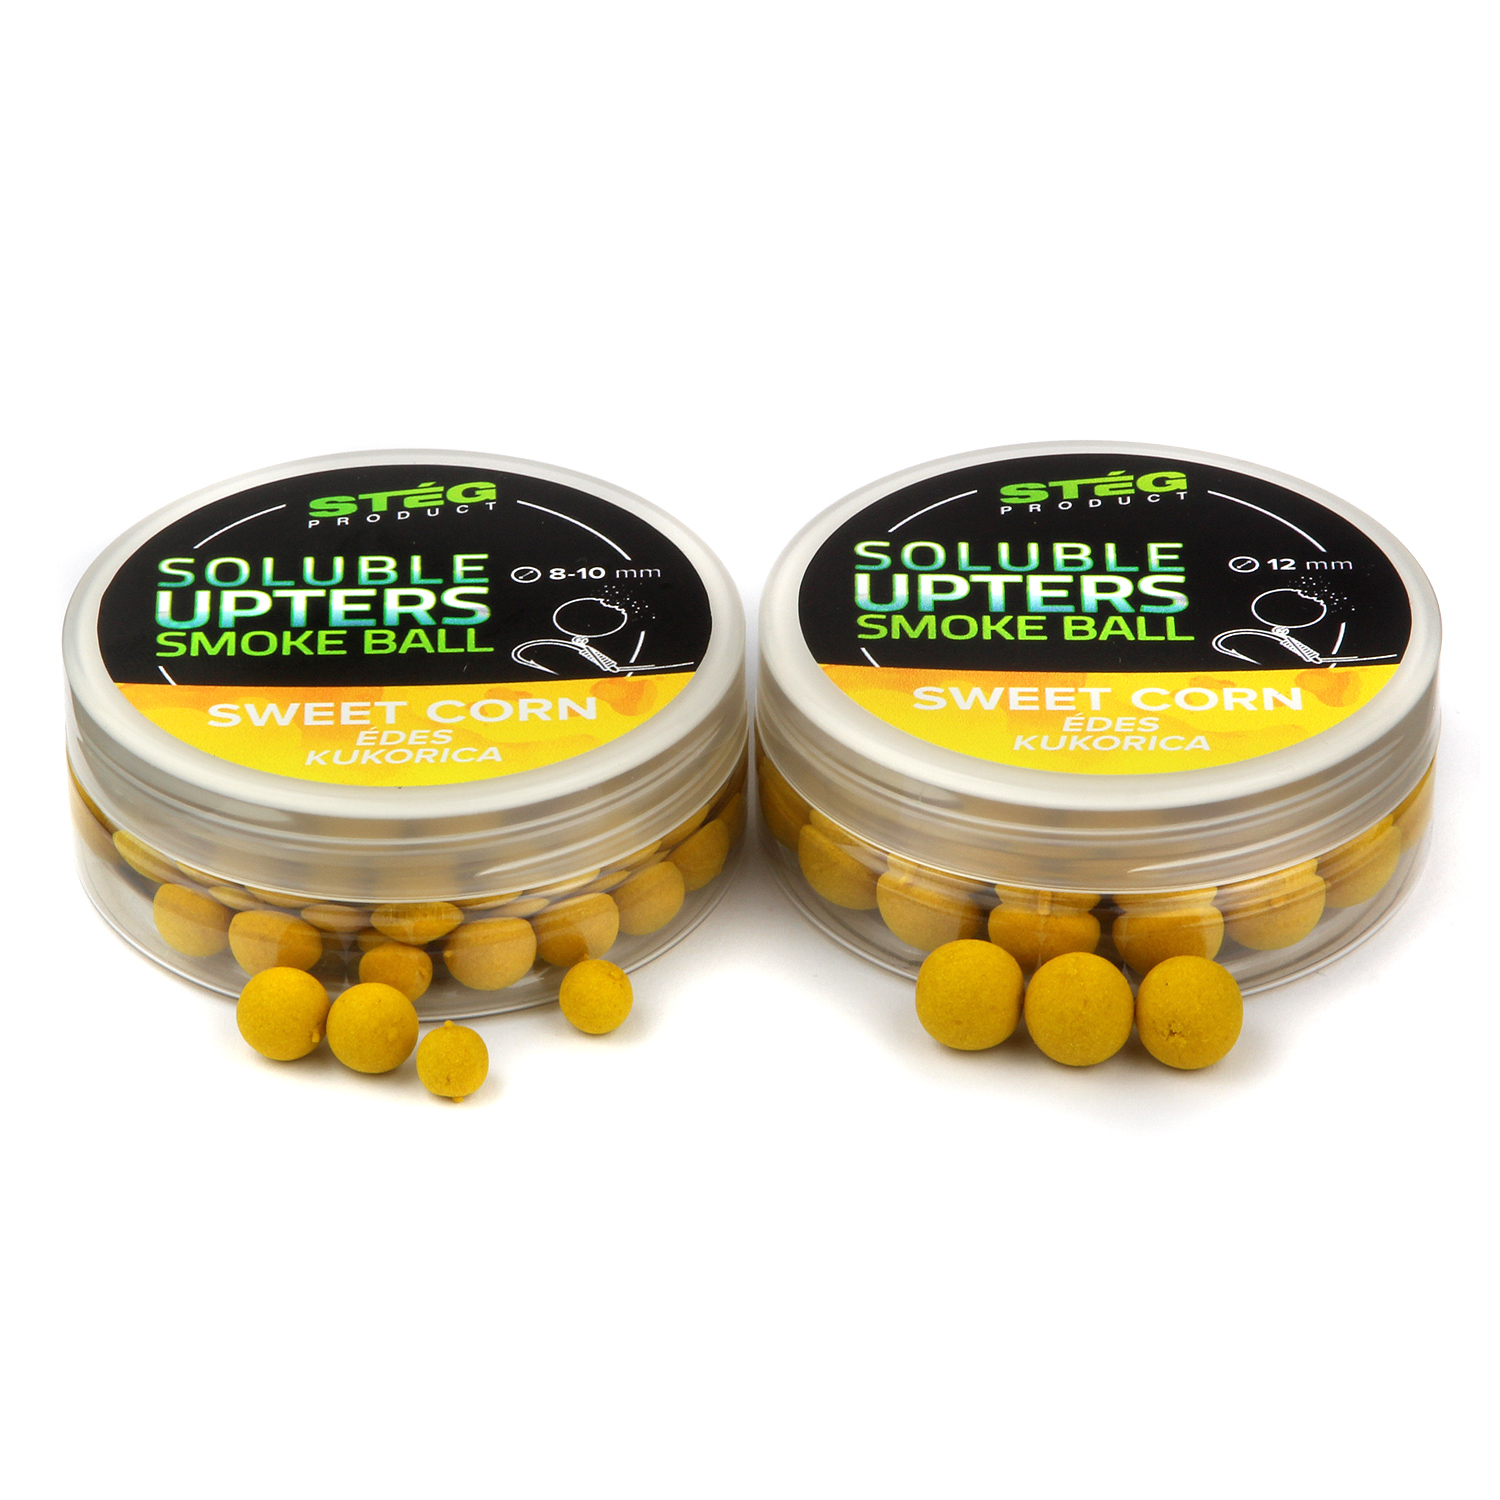 Stg Product Soluble Upters Smoke Ball 8-10mm Sweet Corn 30g